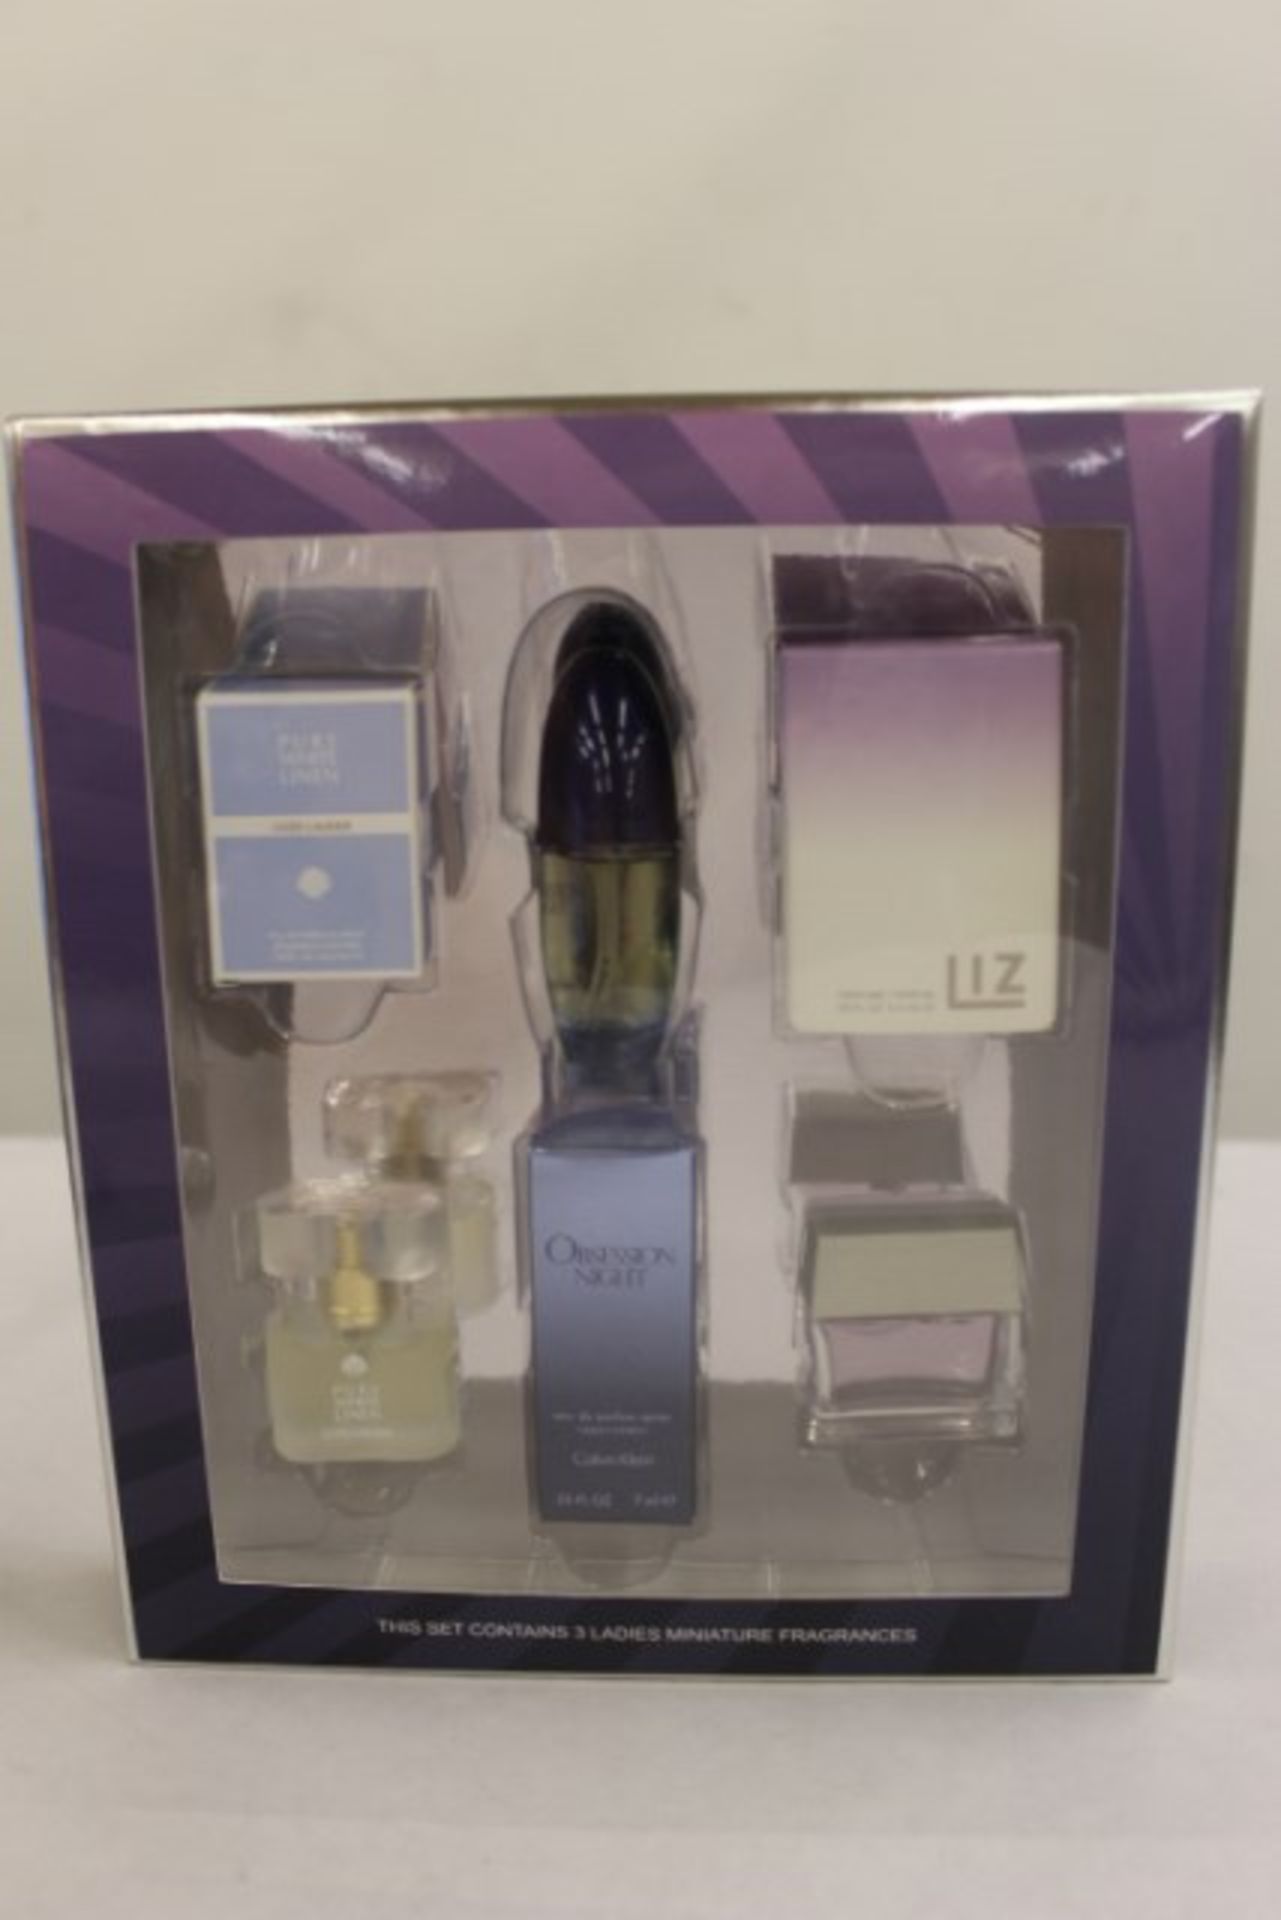 V Ladies Fragrance Collection including Pure White Linen, Obsession Night and Liz Claiborne - Image 2 of 3